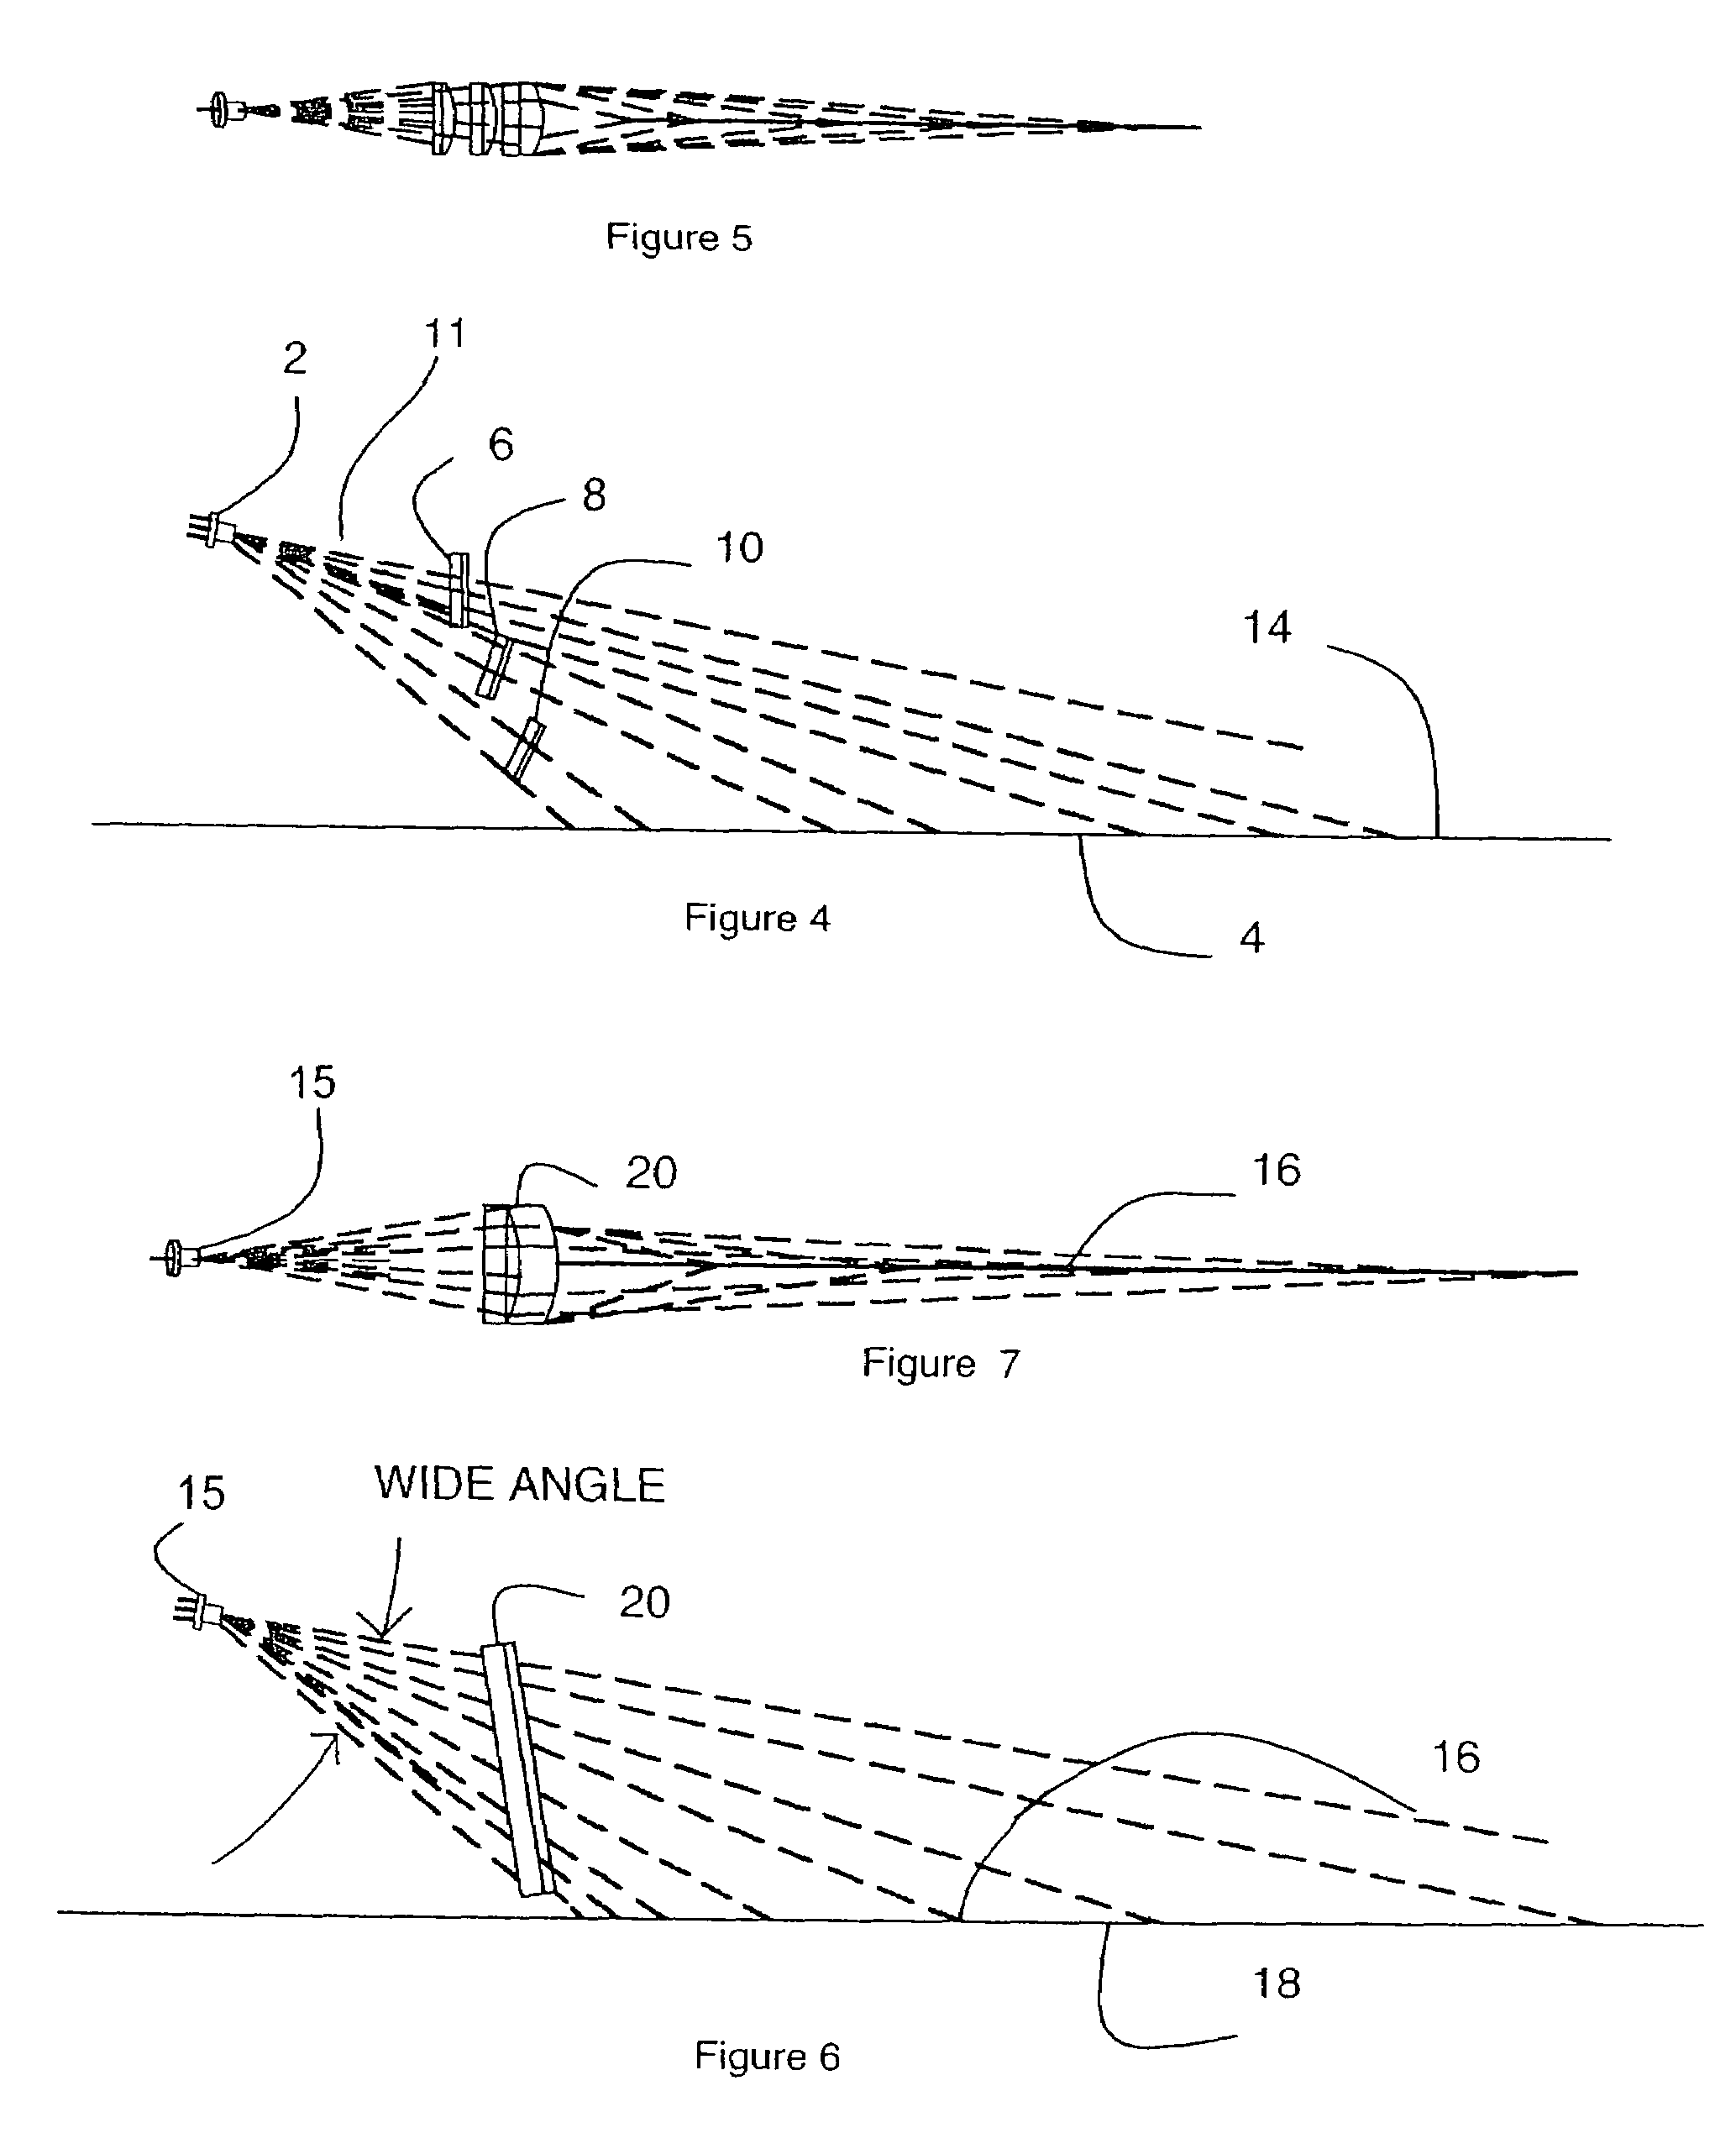 Apparatus for producing a visible line of light on a surface, particularly a wall